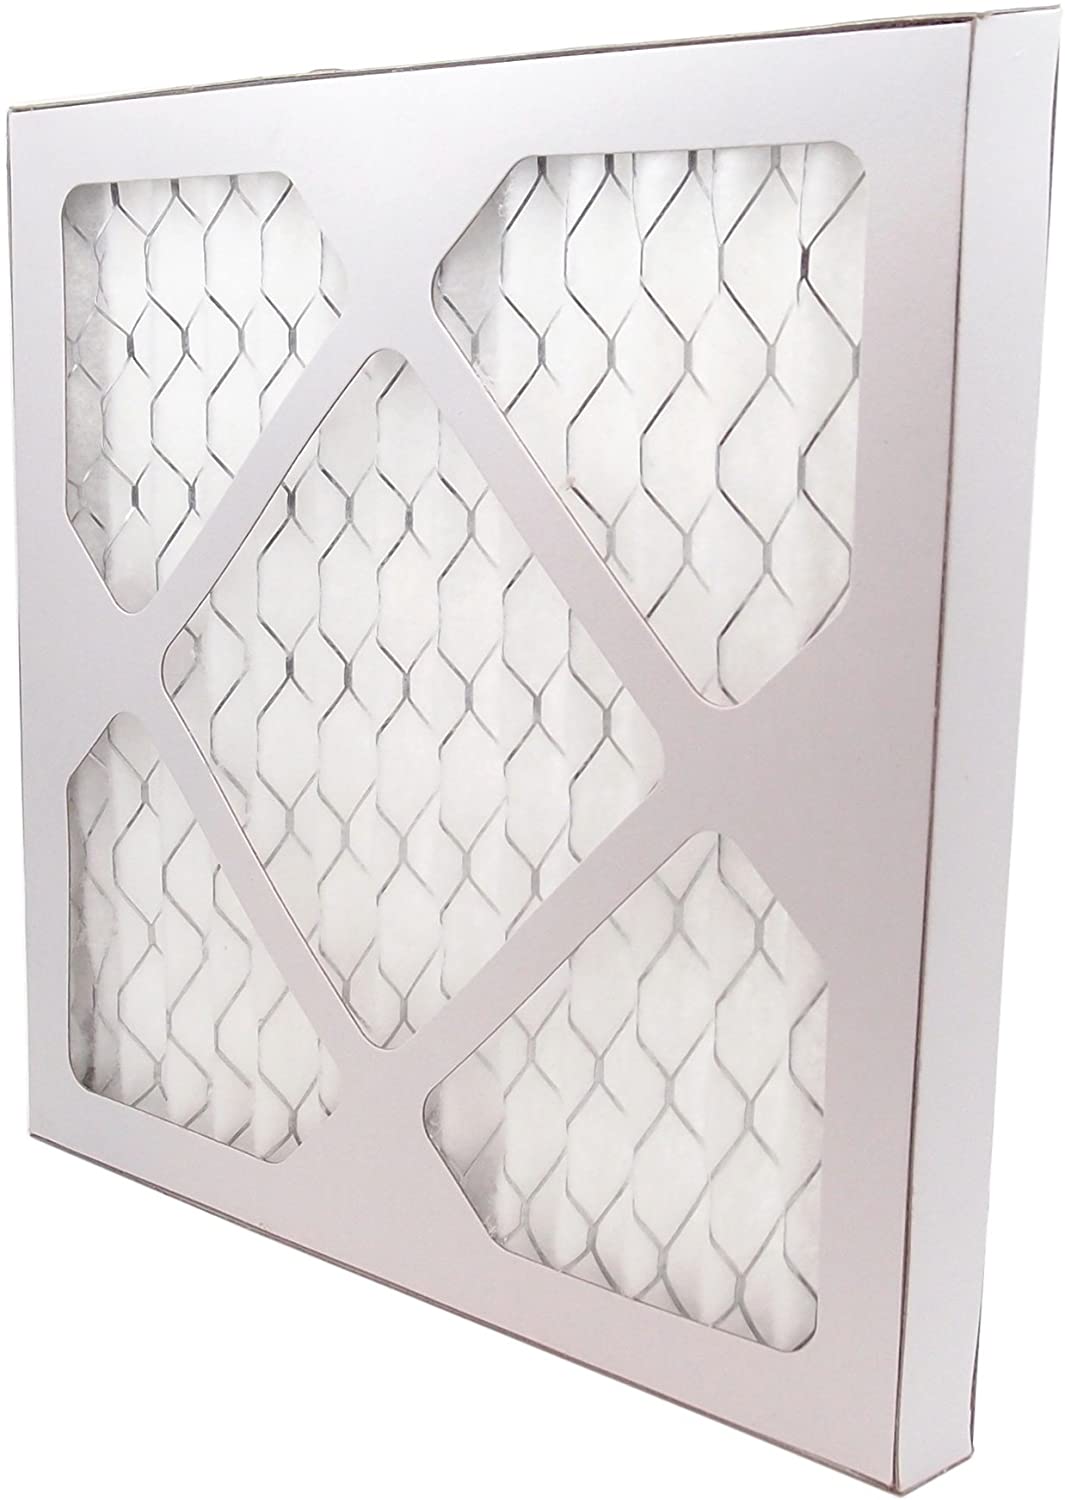 20&quot; x 20&quot; Pleated MERV 8 Filter for HVAC Return Filter Grille [Actual Dimensions: 19.75 X 19.75] 3-Pack